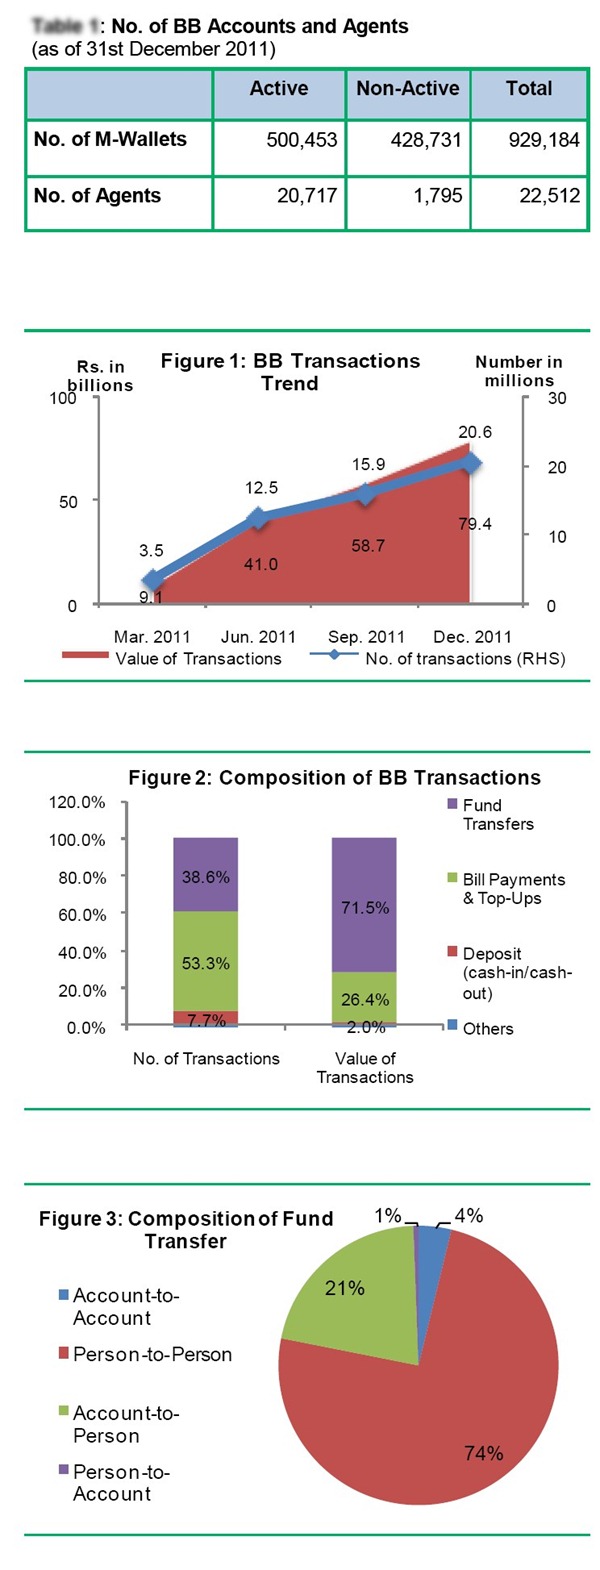 Mobile Banking 001 thumb Branchless Banking Transactions Hit Rs. 79.4 Billion Mark During Sep Dec 2011